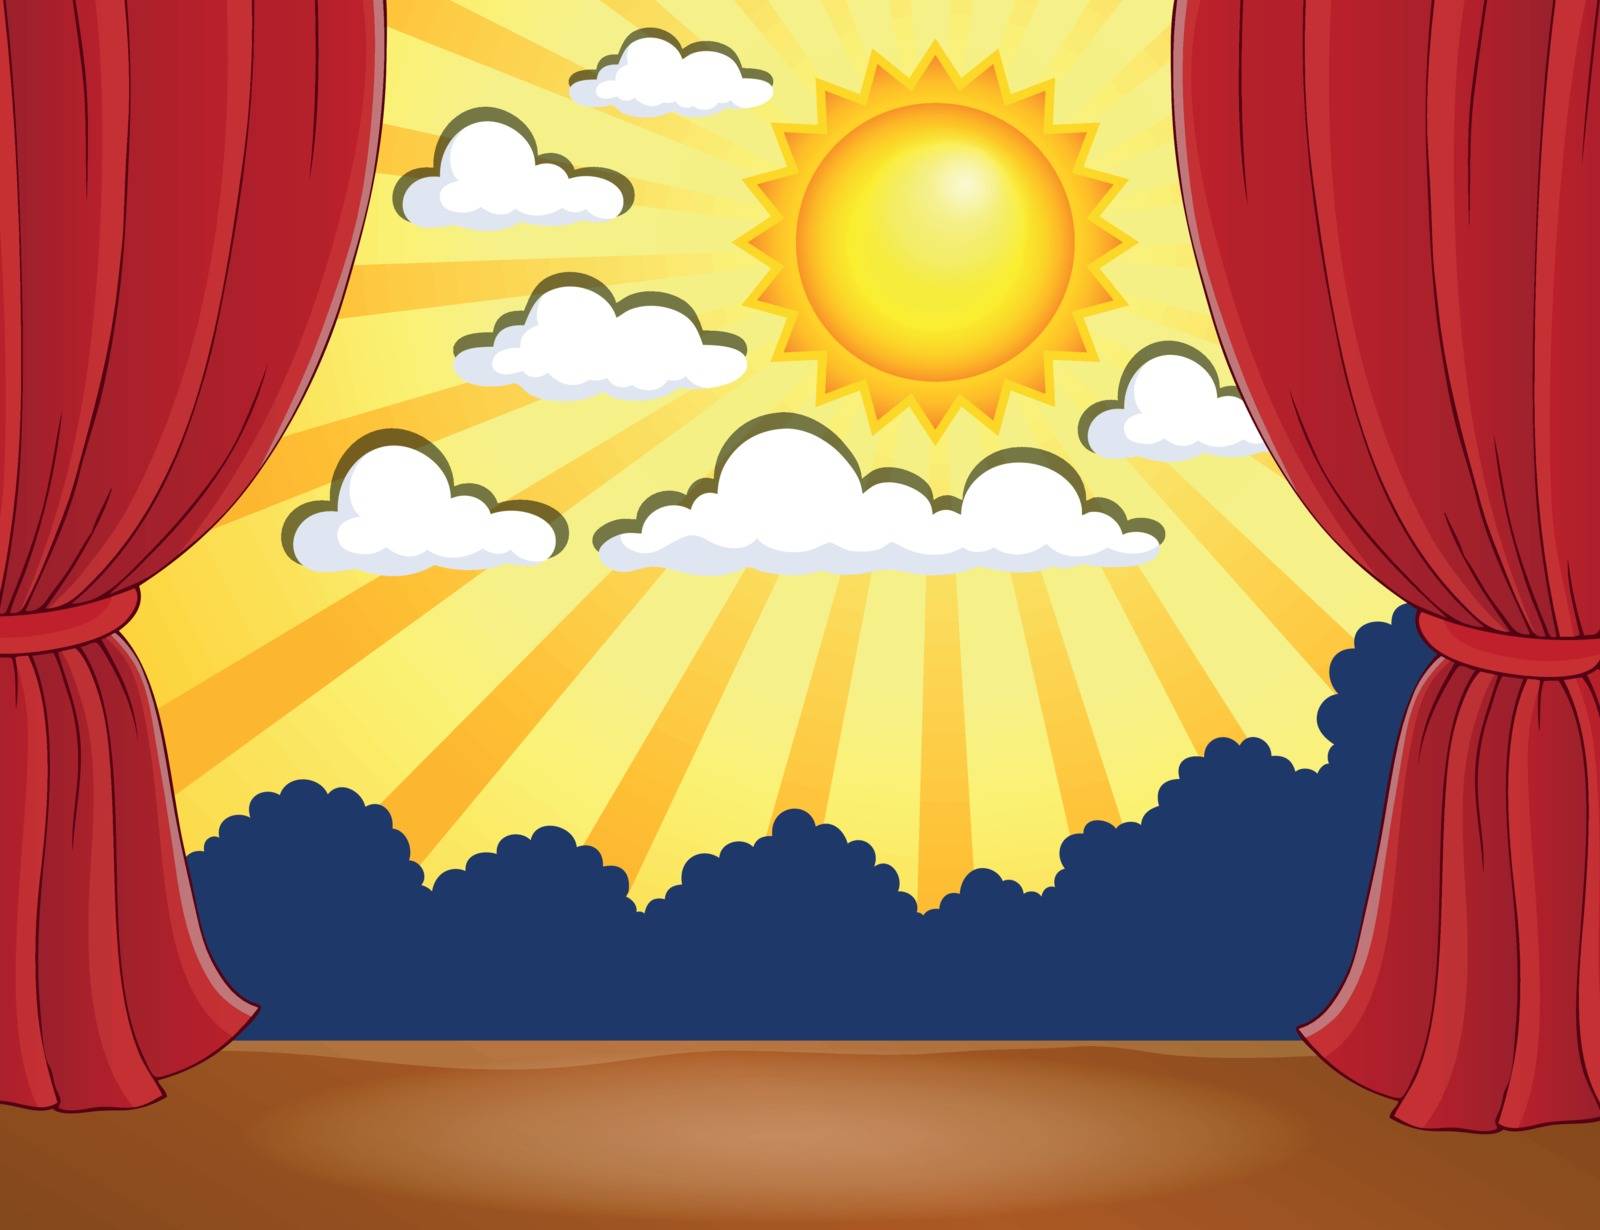 Stage with abstract sun 3 - eps10 vector illustration.